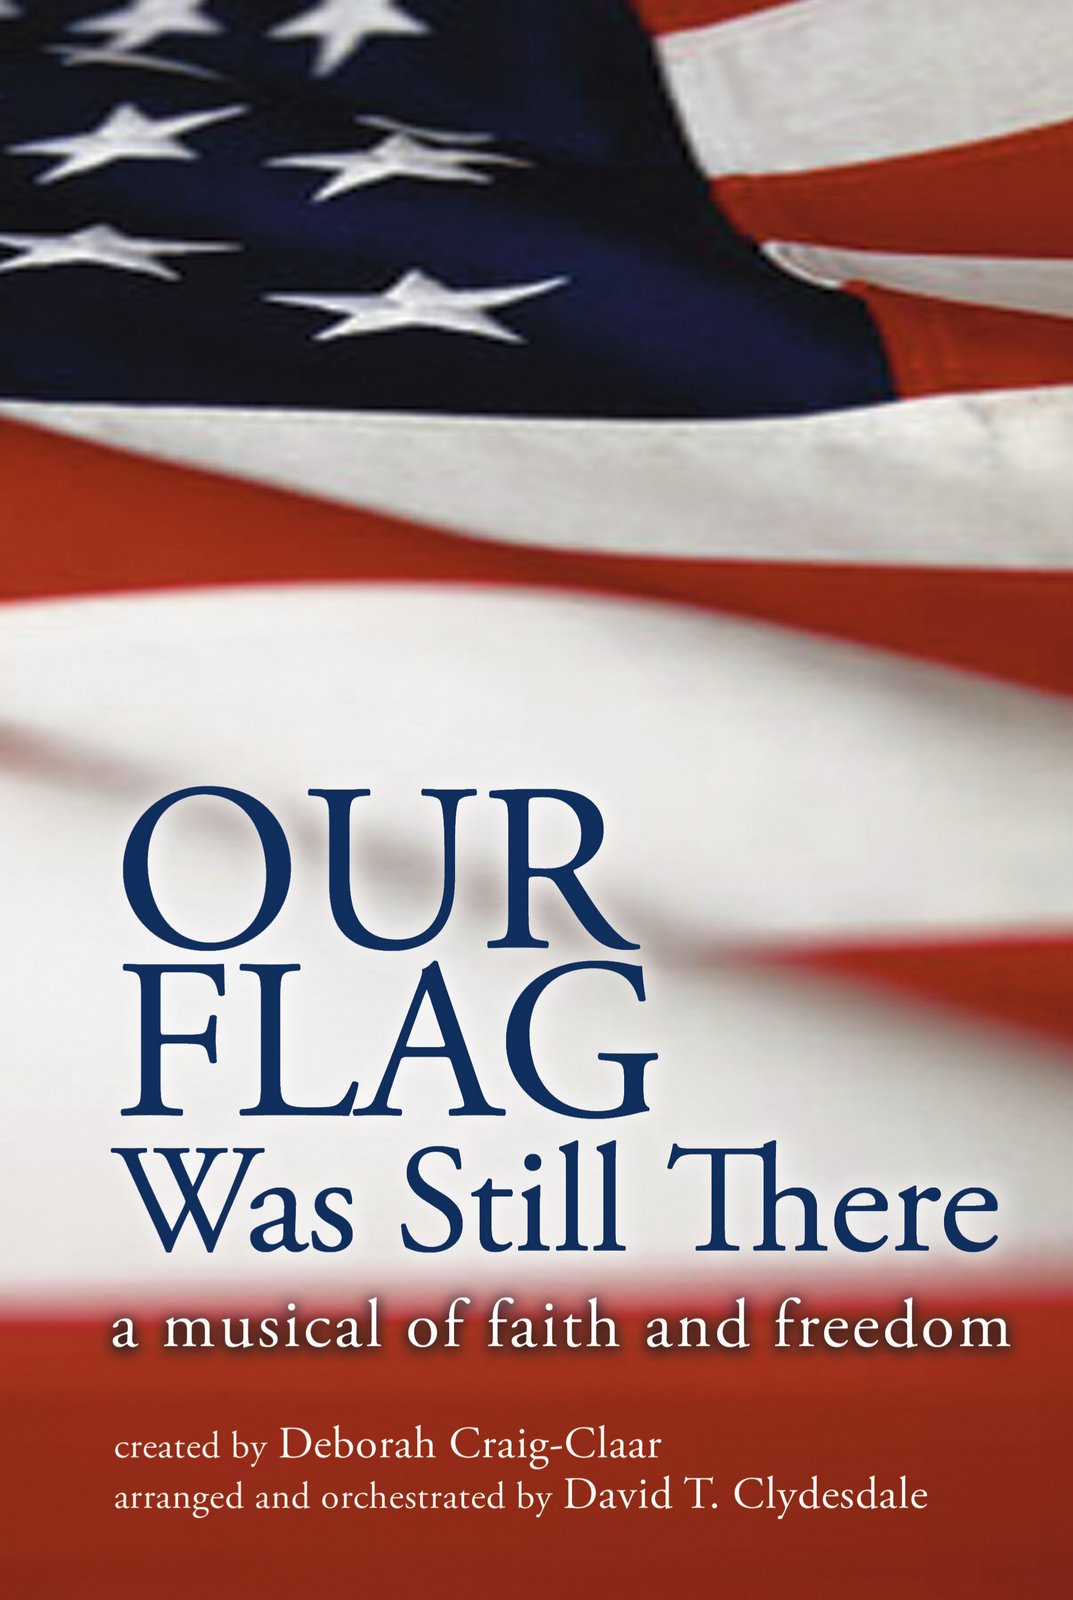 [Our+Flag+Was+Still+There.jpg]